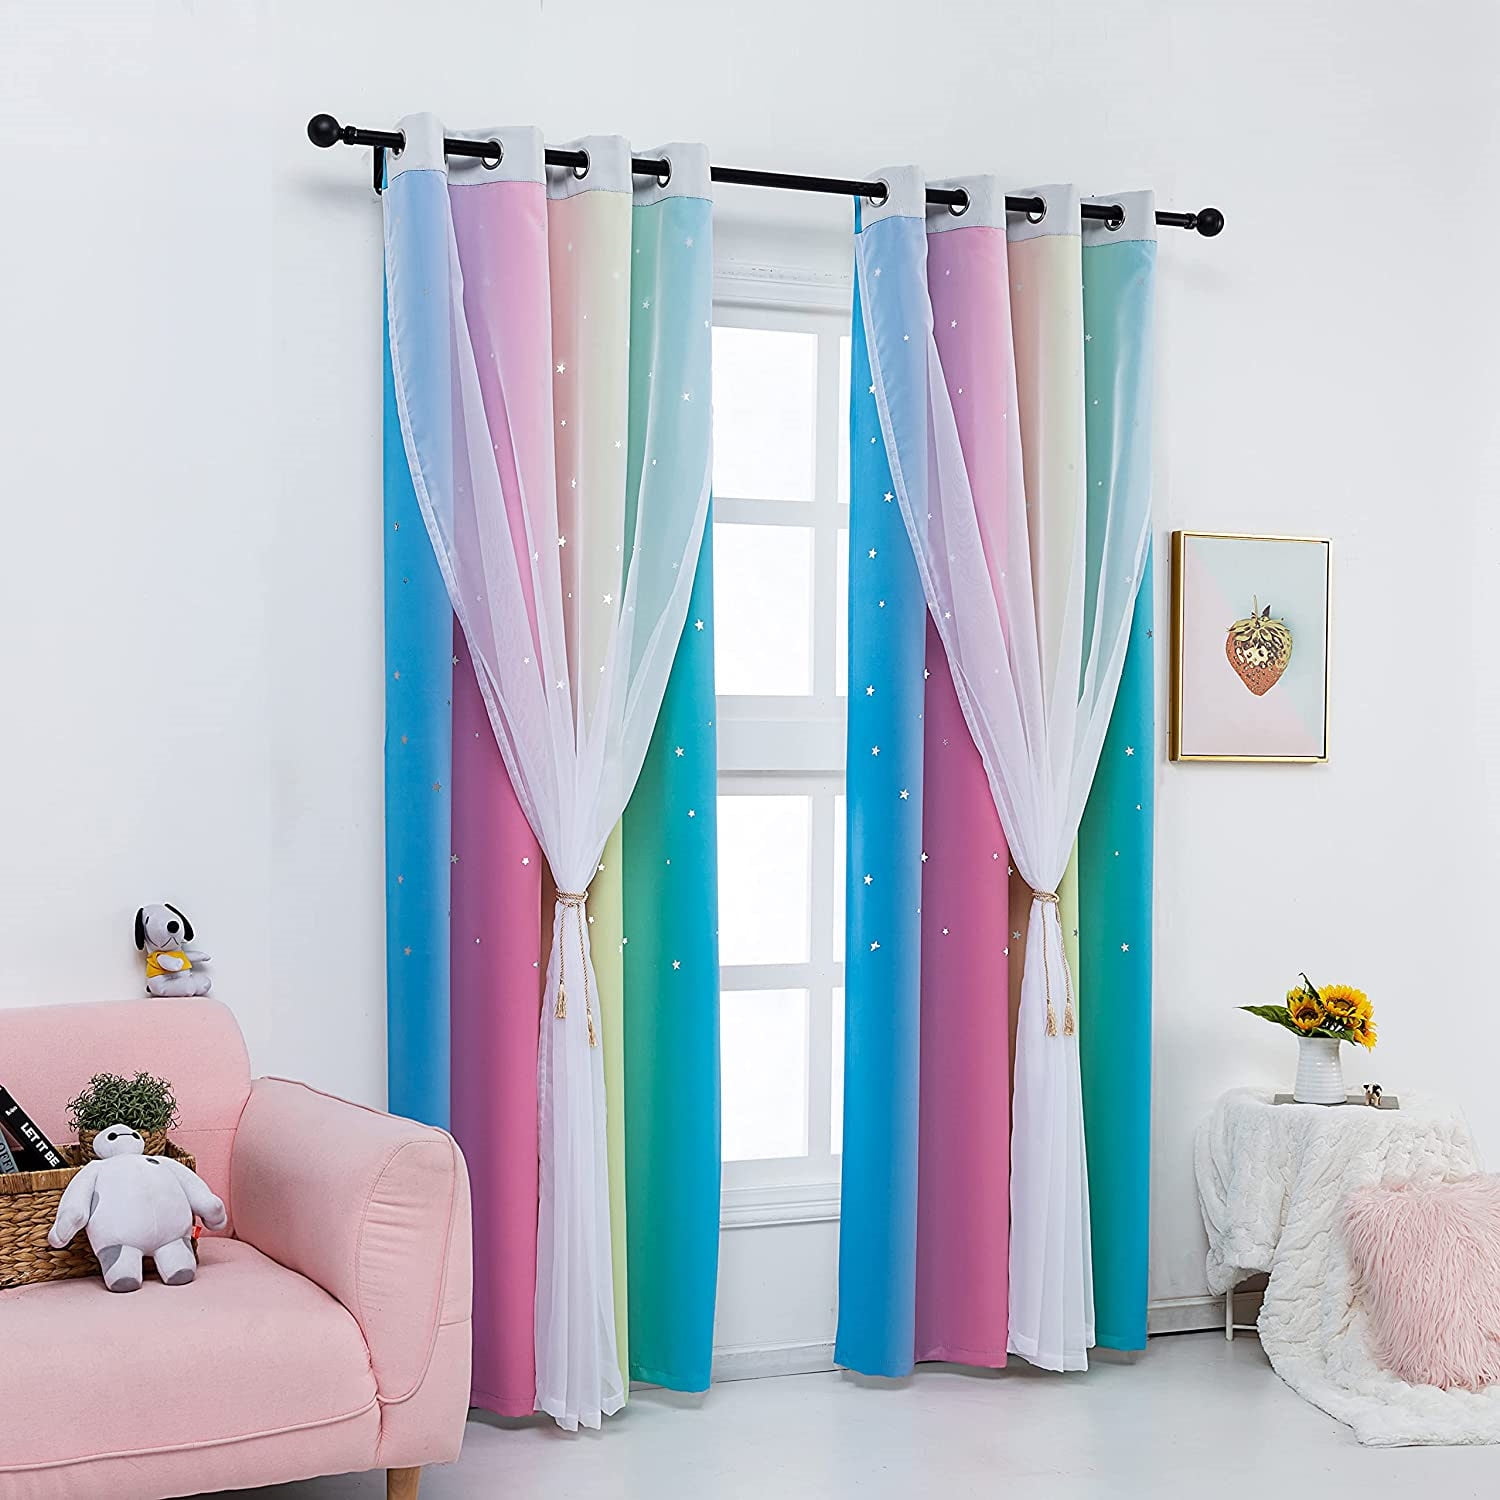 Curtains by Jetec − Now: Shop at $8.99+